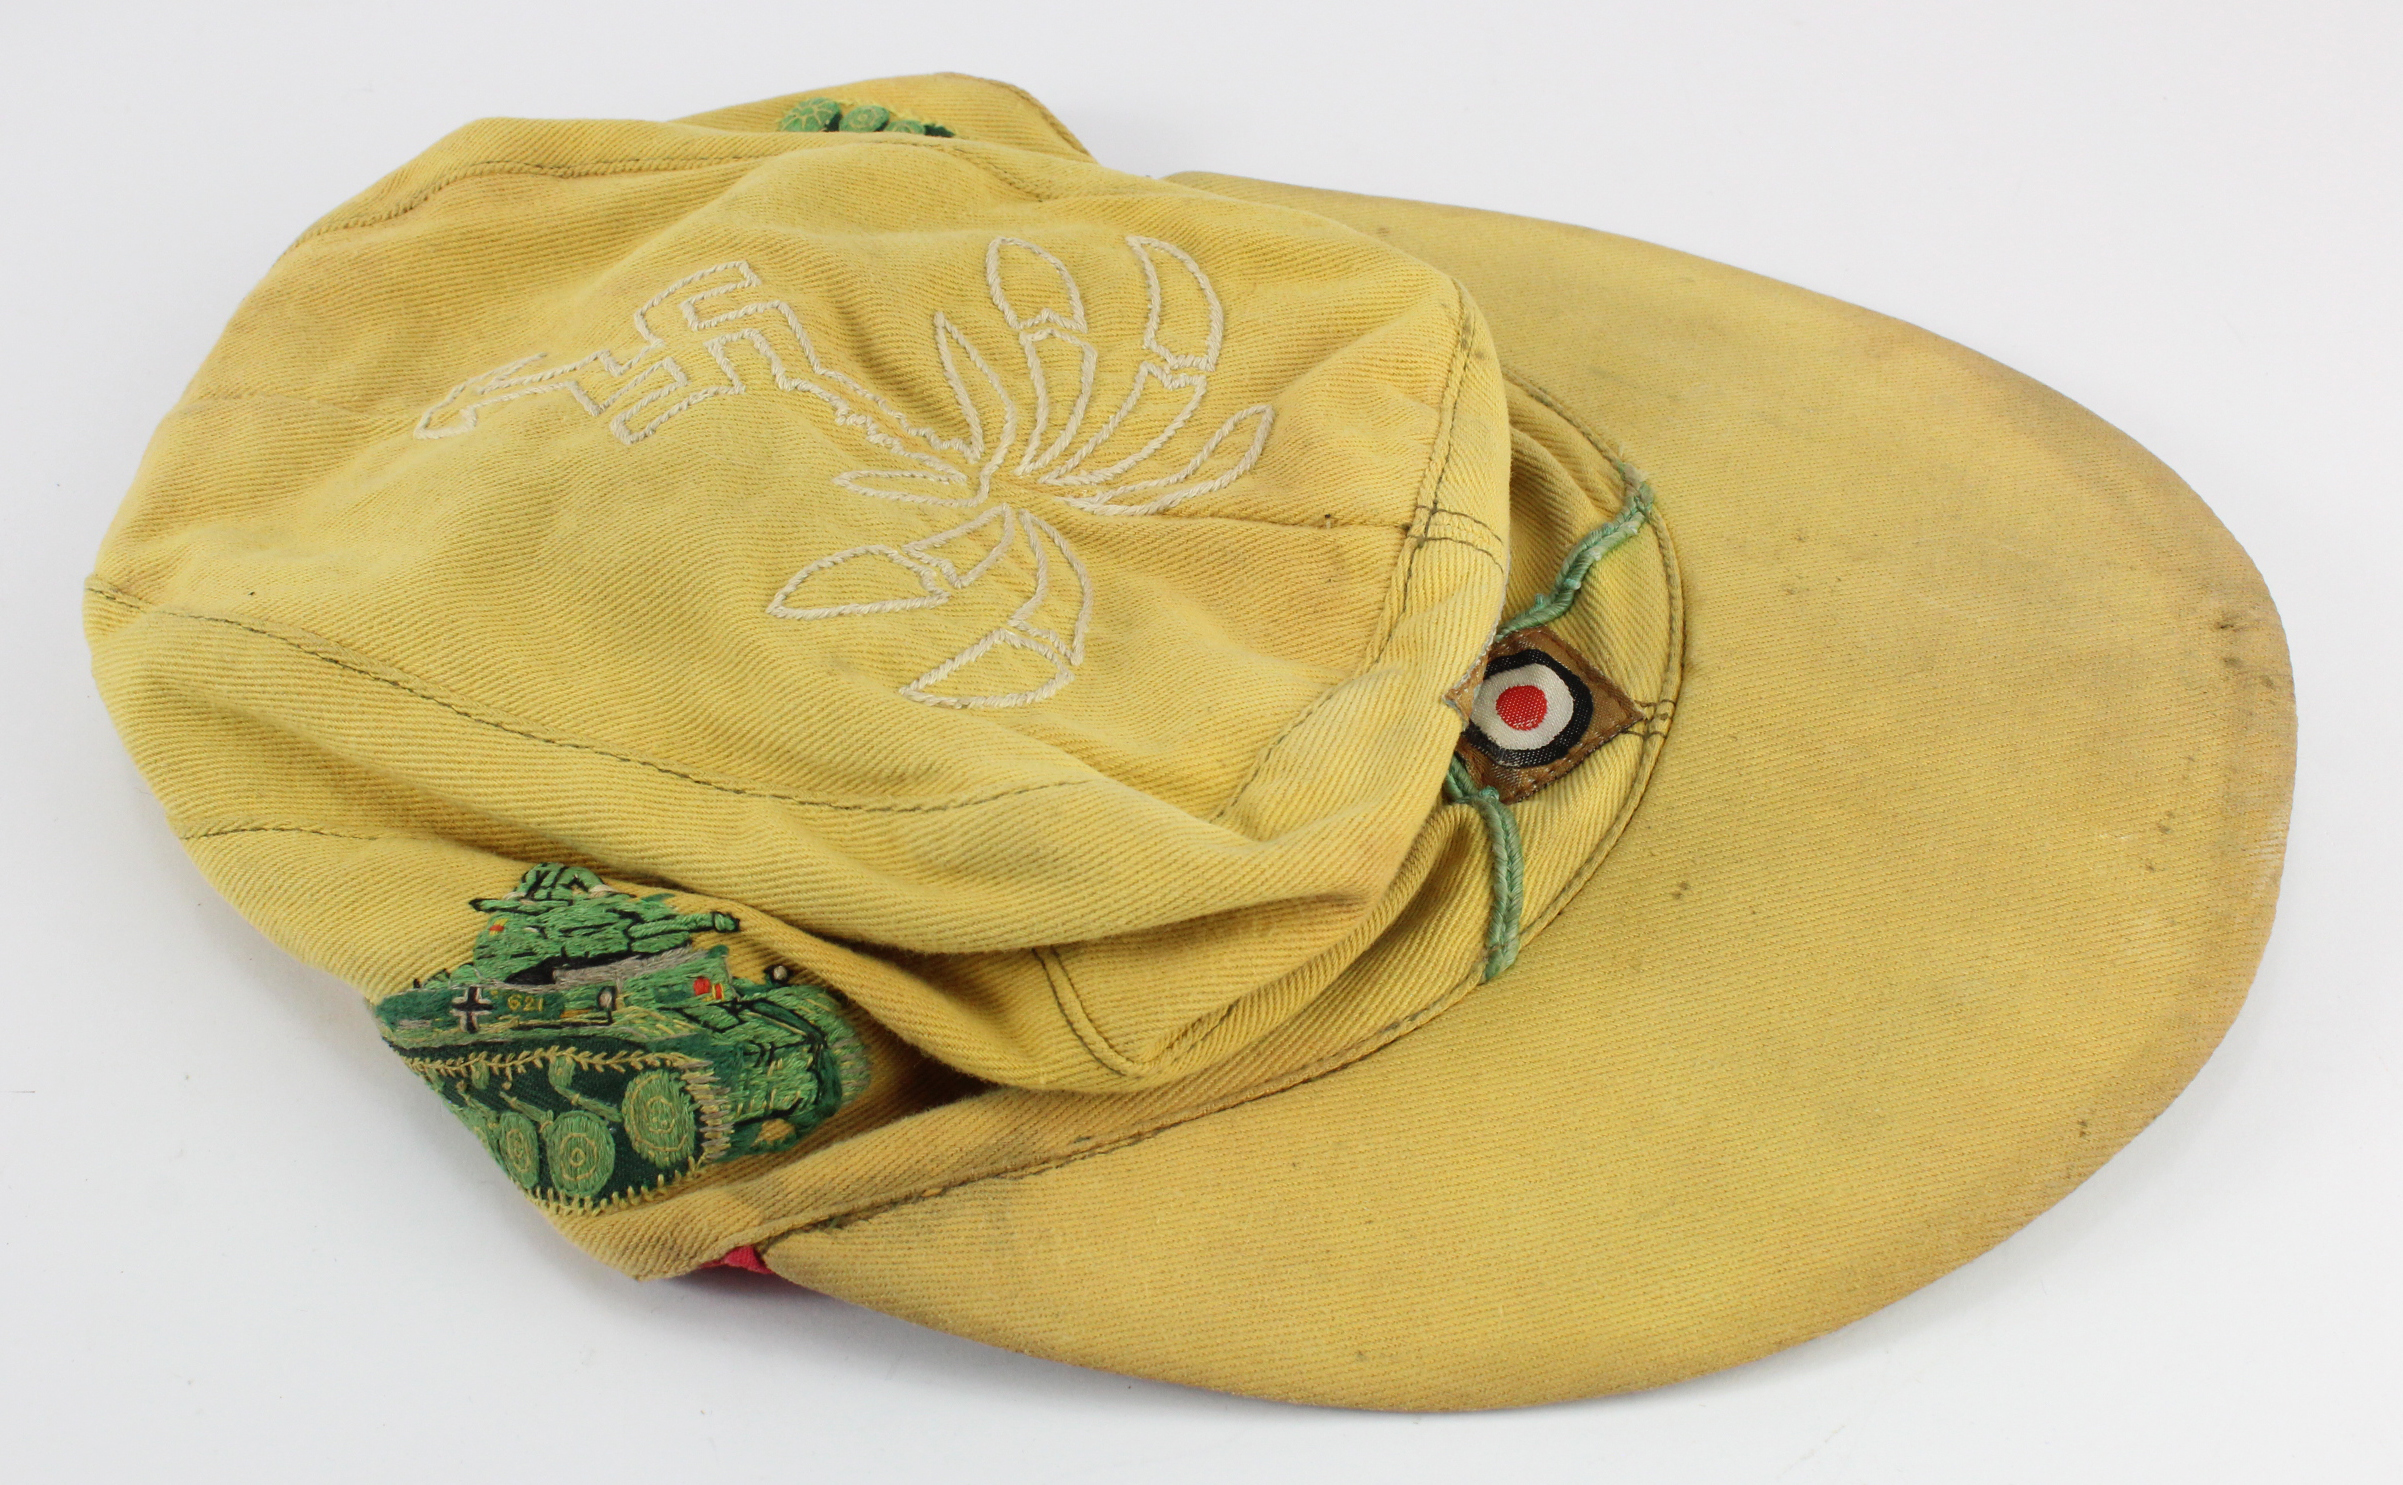 German Afrika Korps Forage Cap with embroided Palm tree and Tanks, very unusual